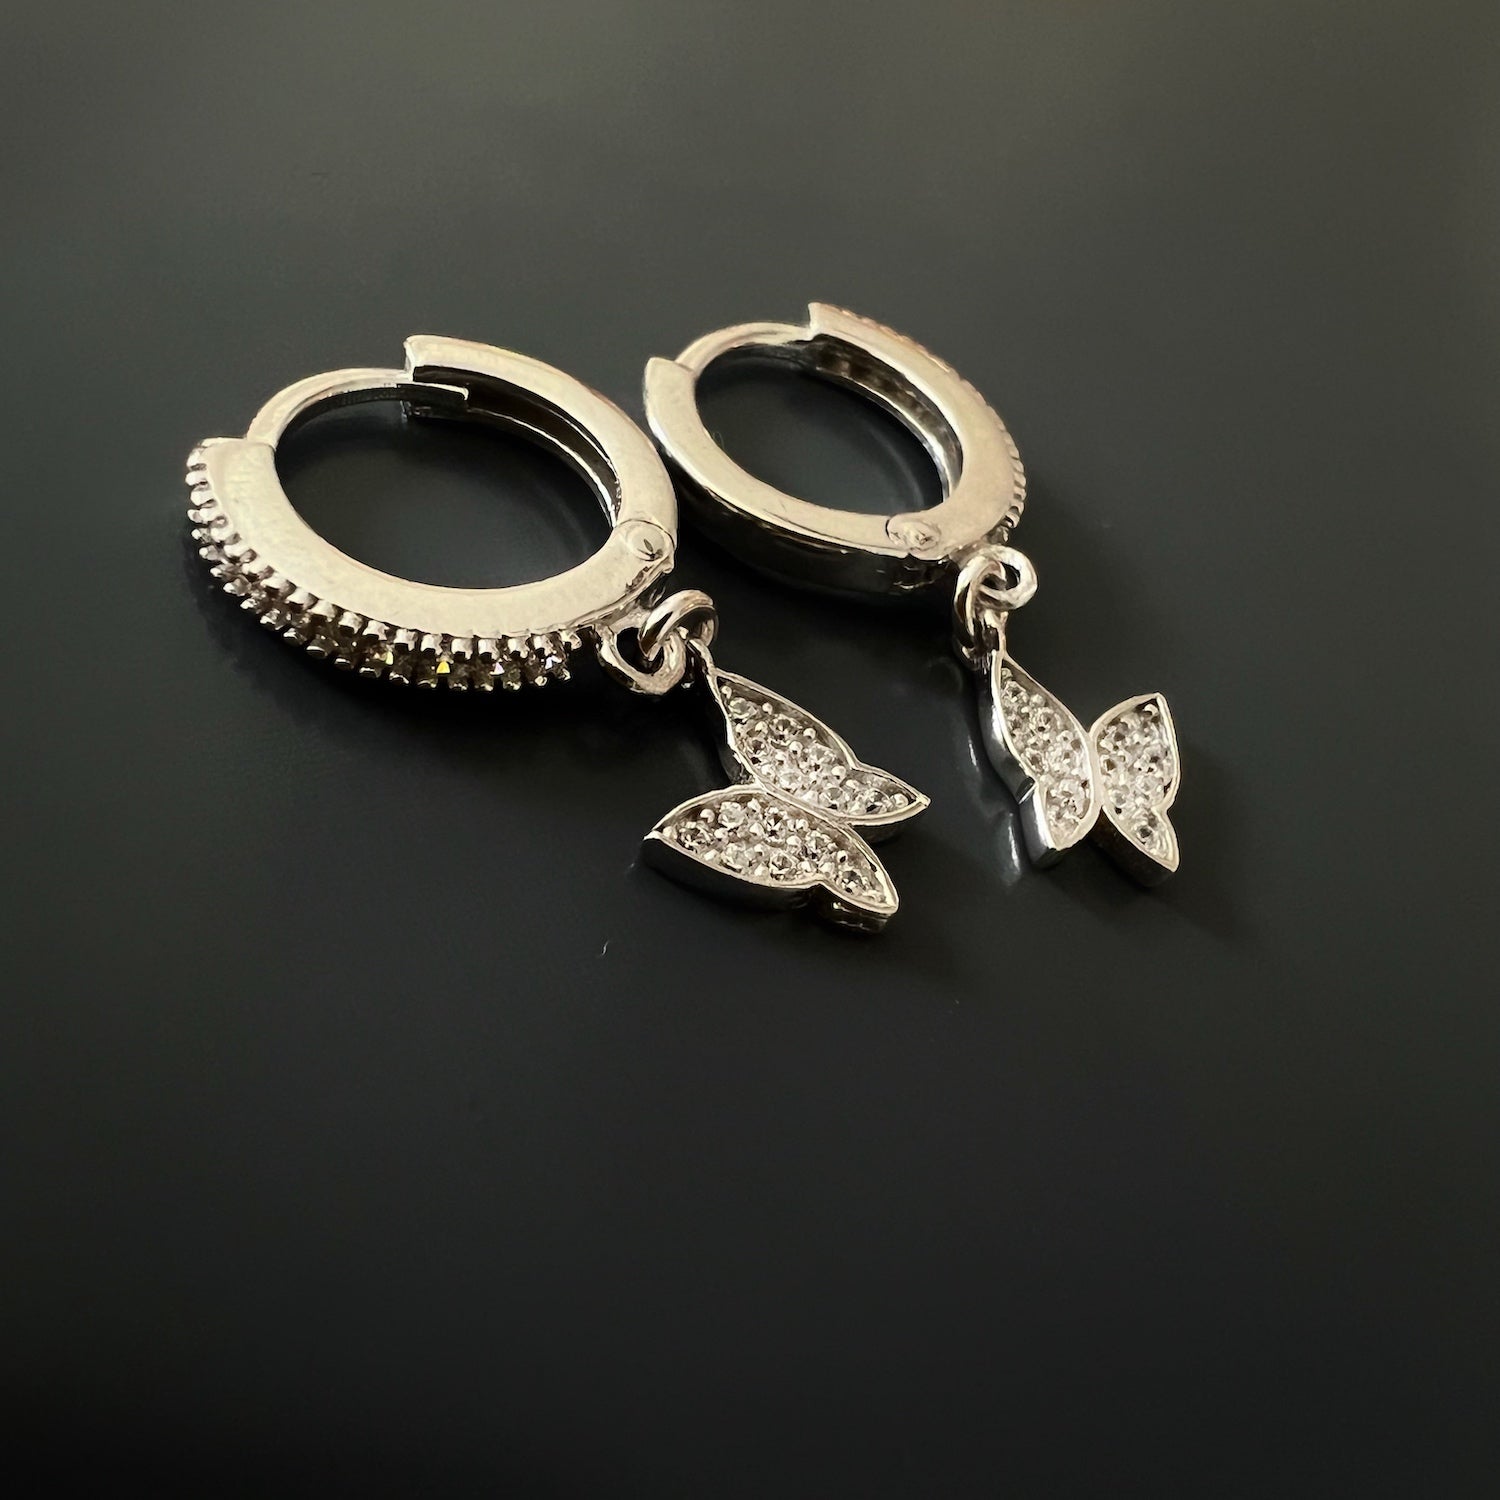 Elegant and timeless Silver Sparkly Butterfly Earrings, perfect for any occasion